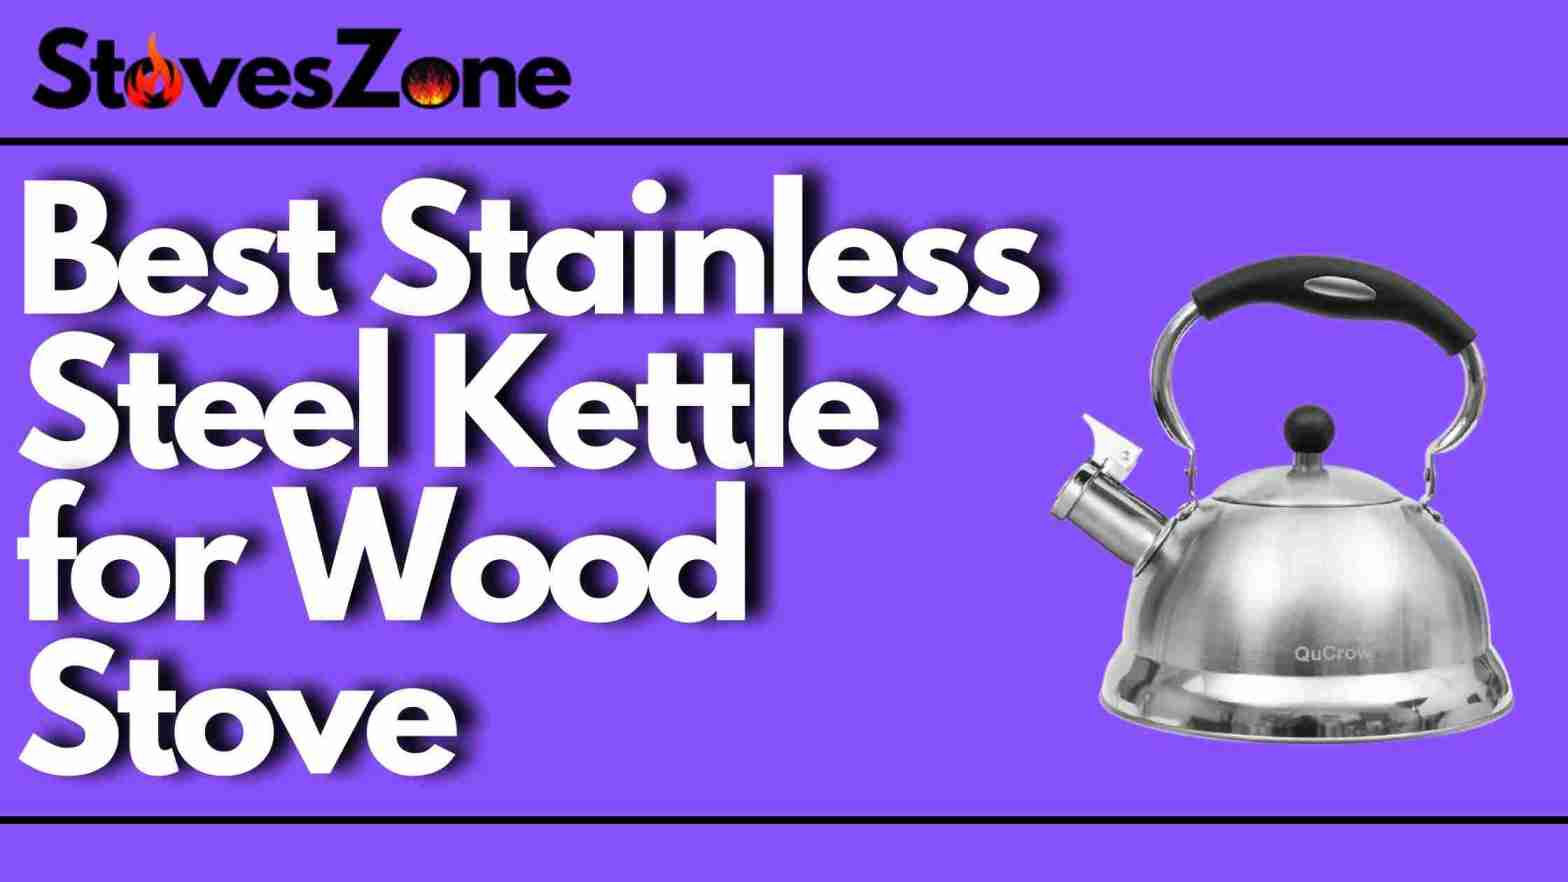 Best Stainless Steel Kettle for Wood Stove